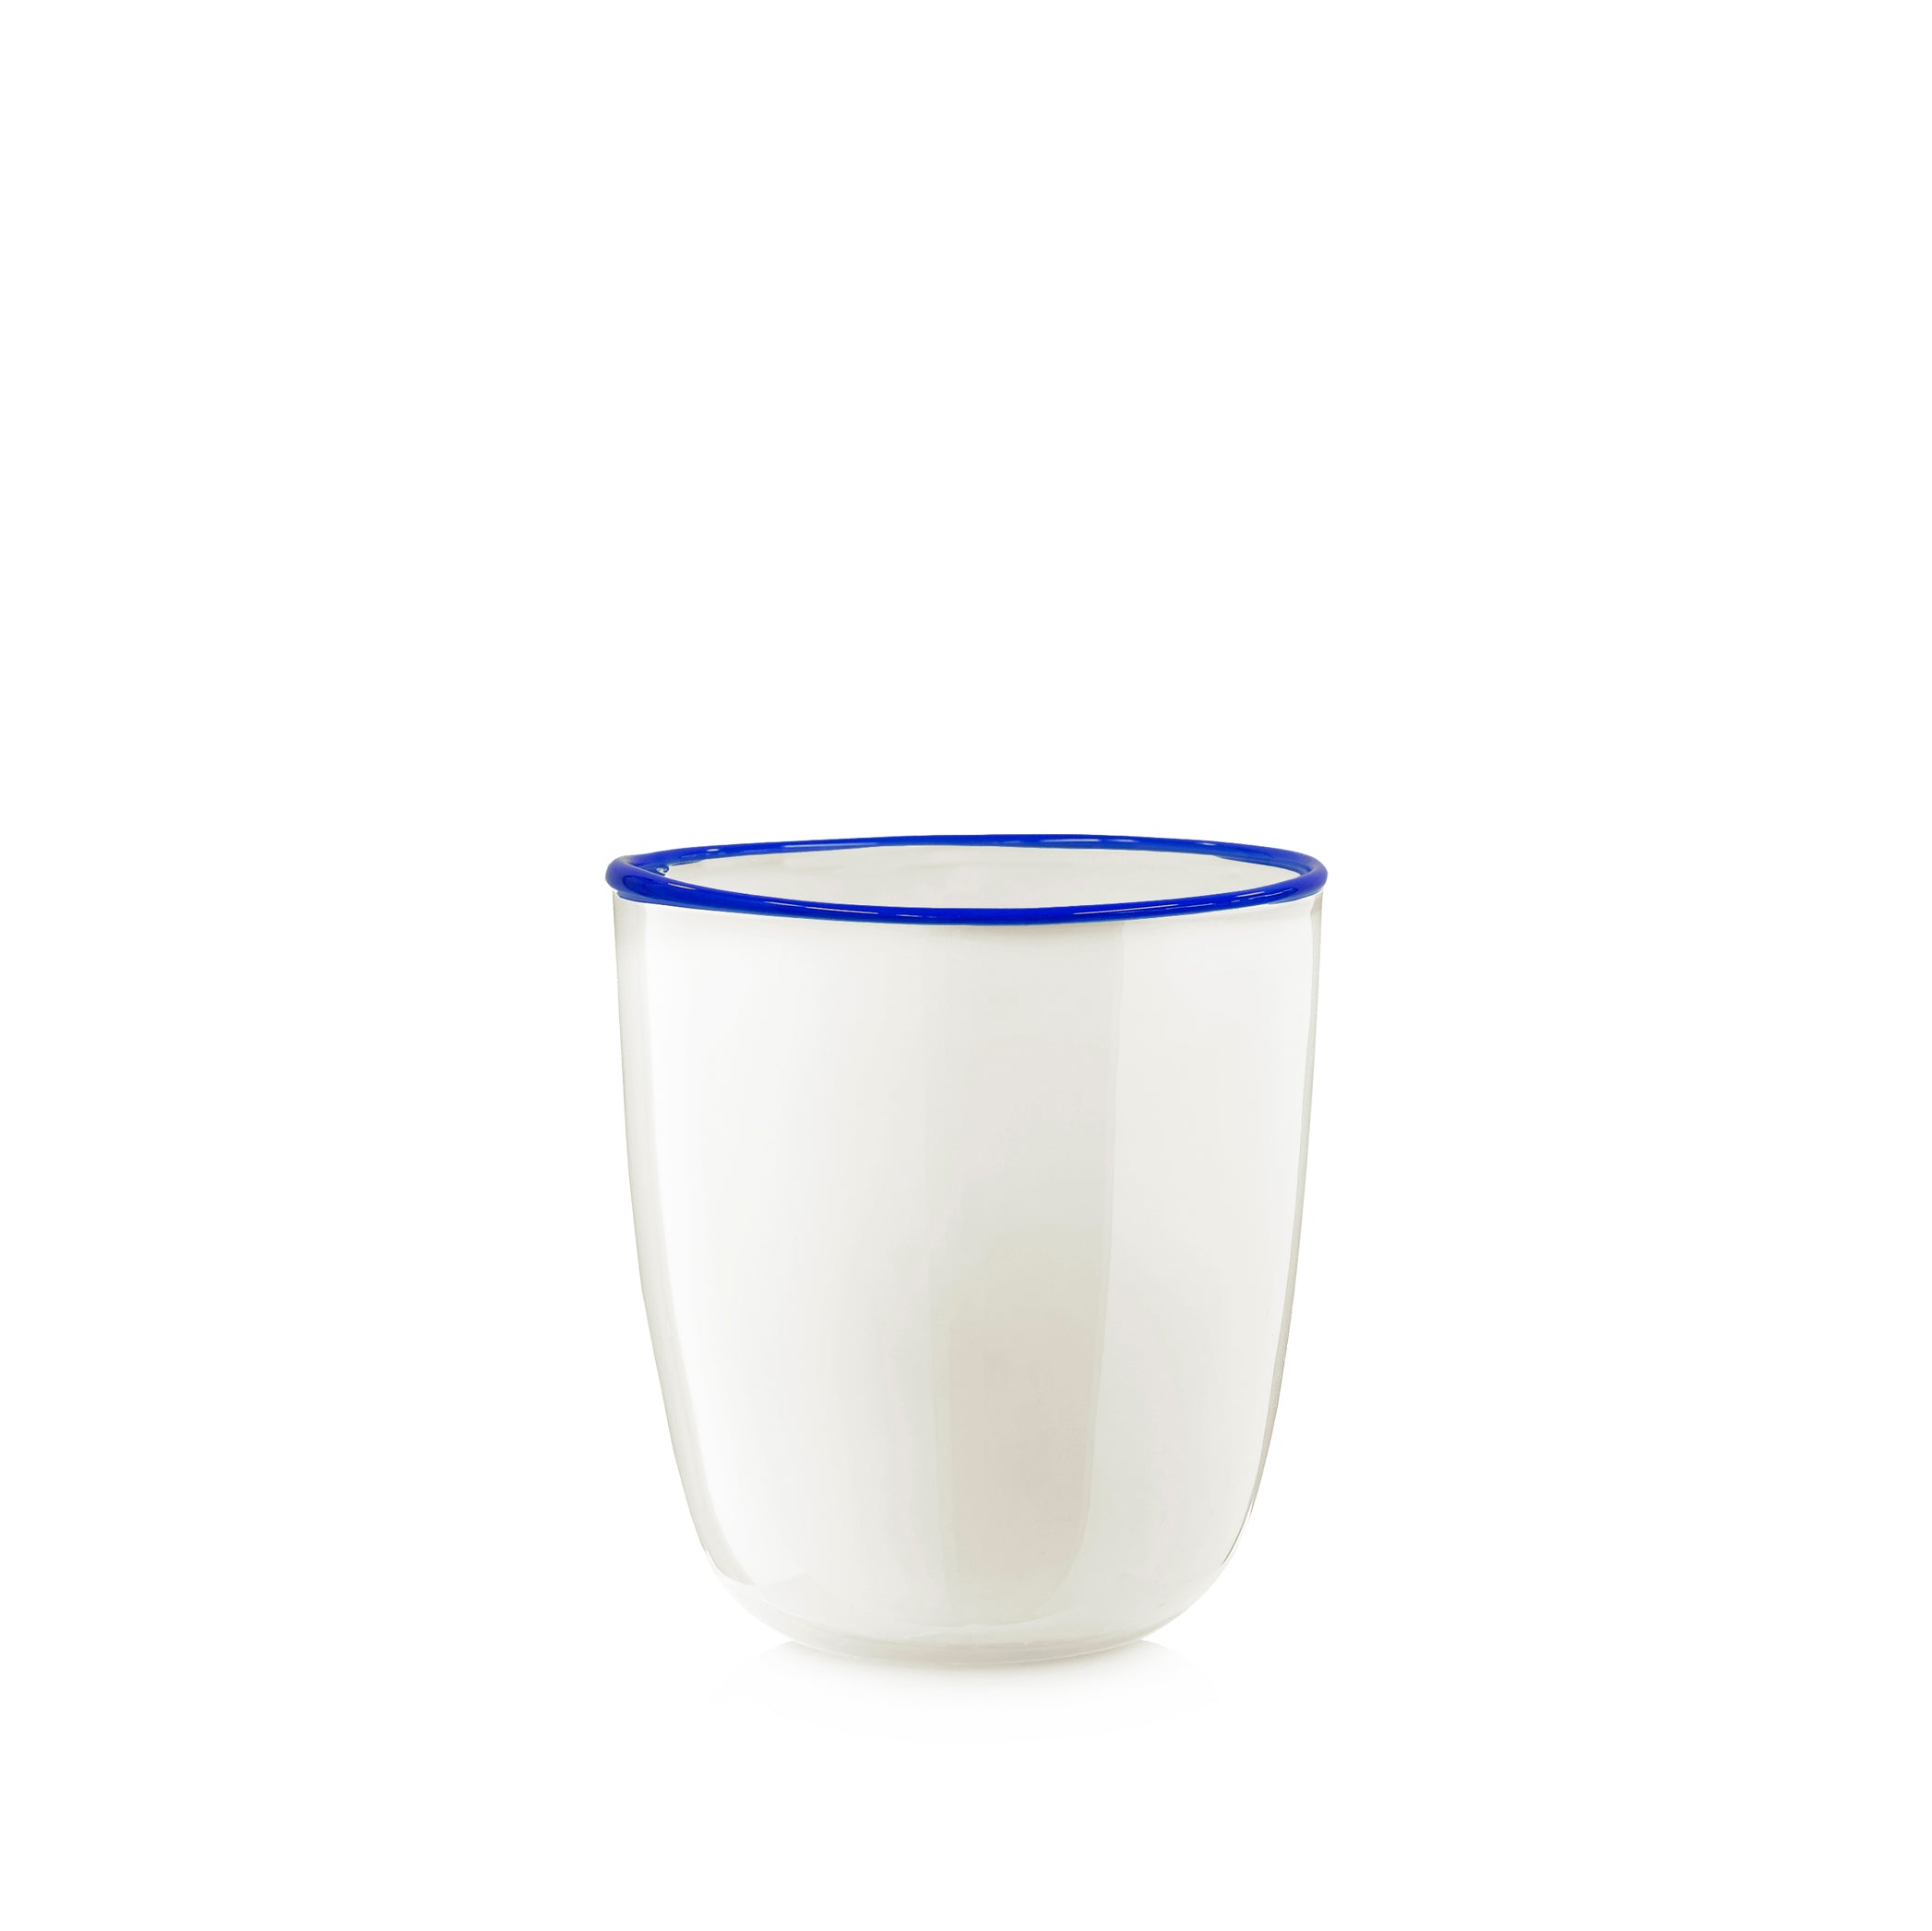 Handblown Glass Bumba Jug in White with Royal Blue Rim and Handle, 3lt